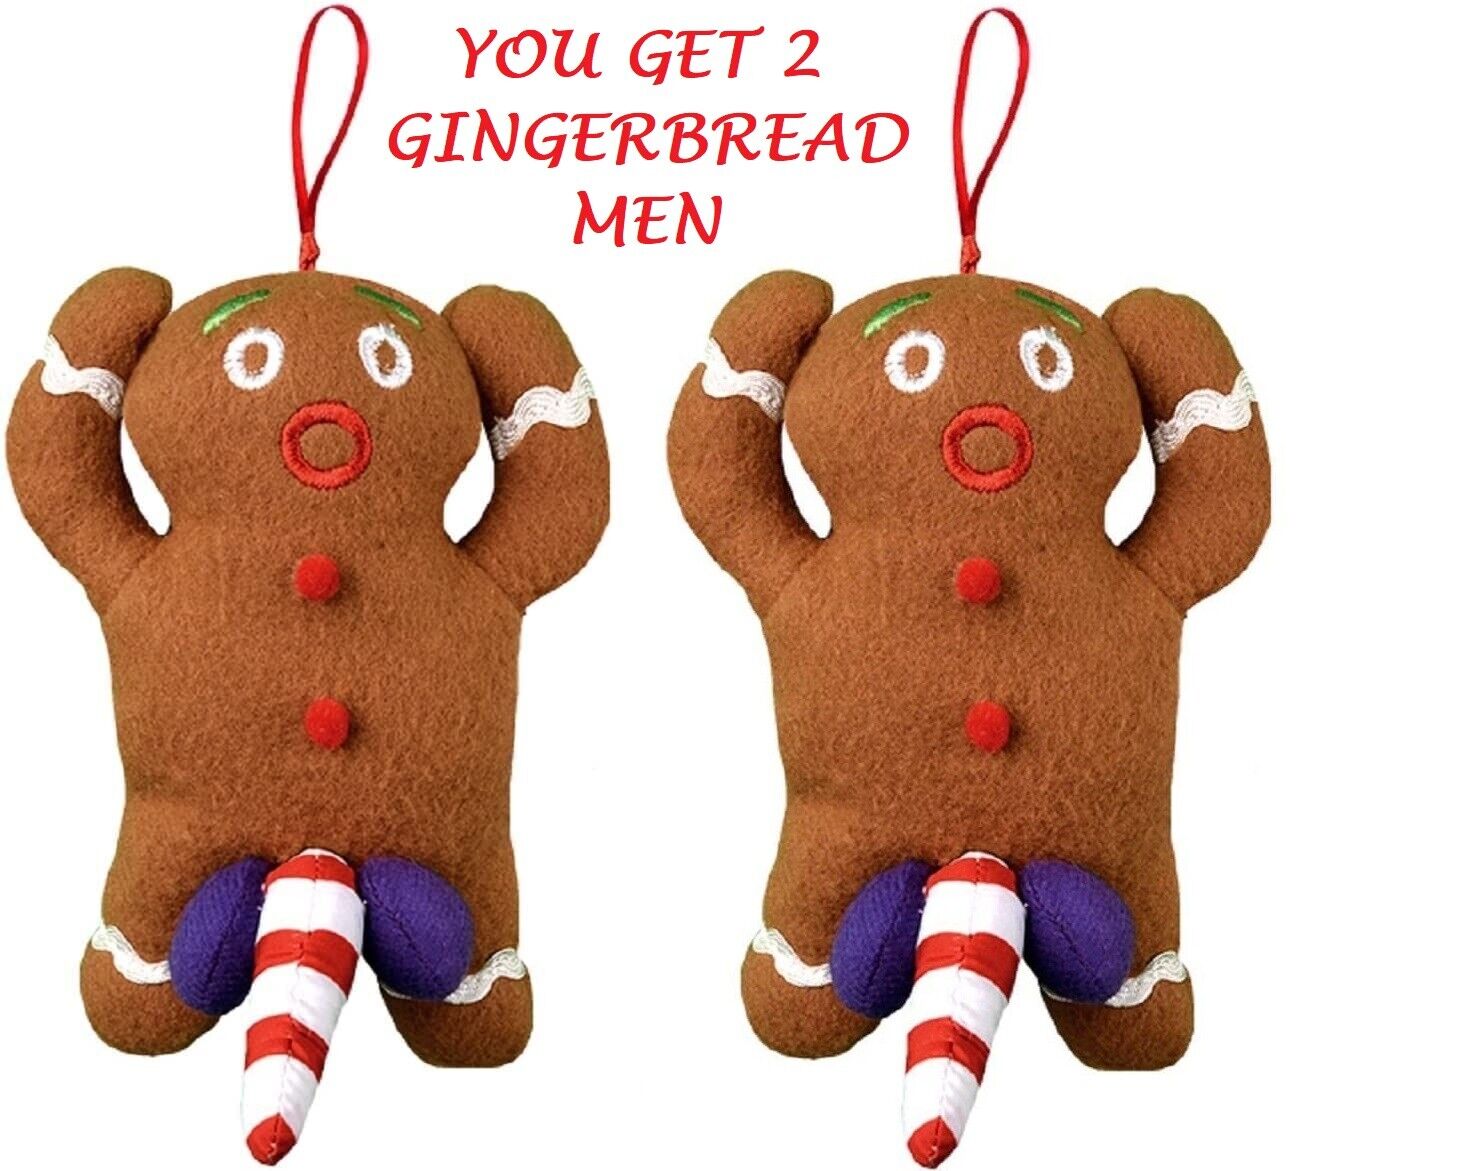 Naughty Gingerbread Man (SET OF 2) Ornament-Dirty Talking 